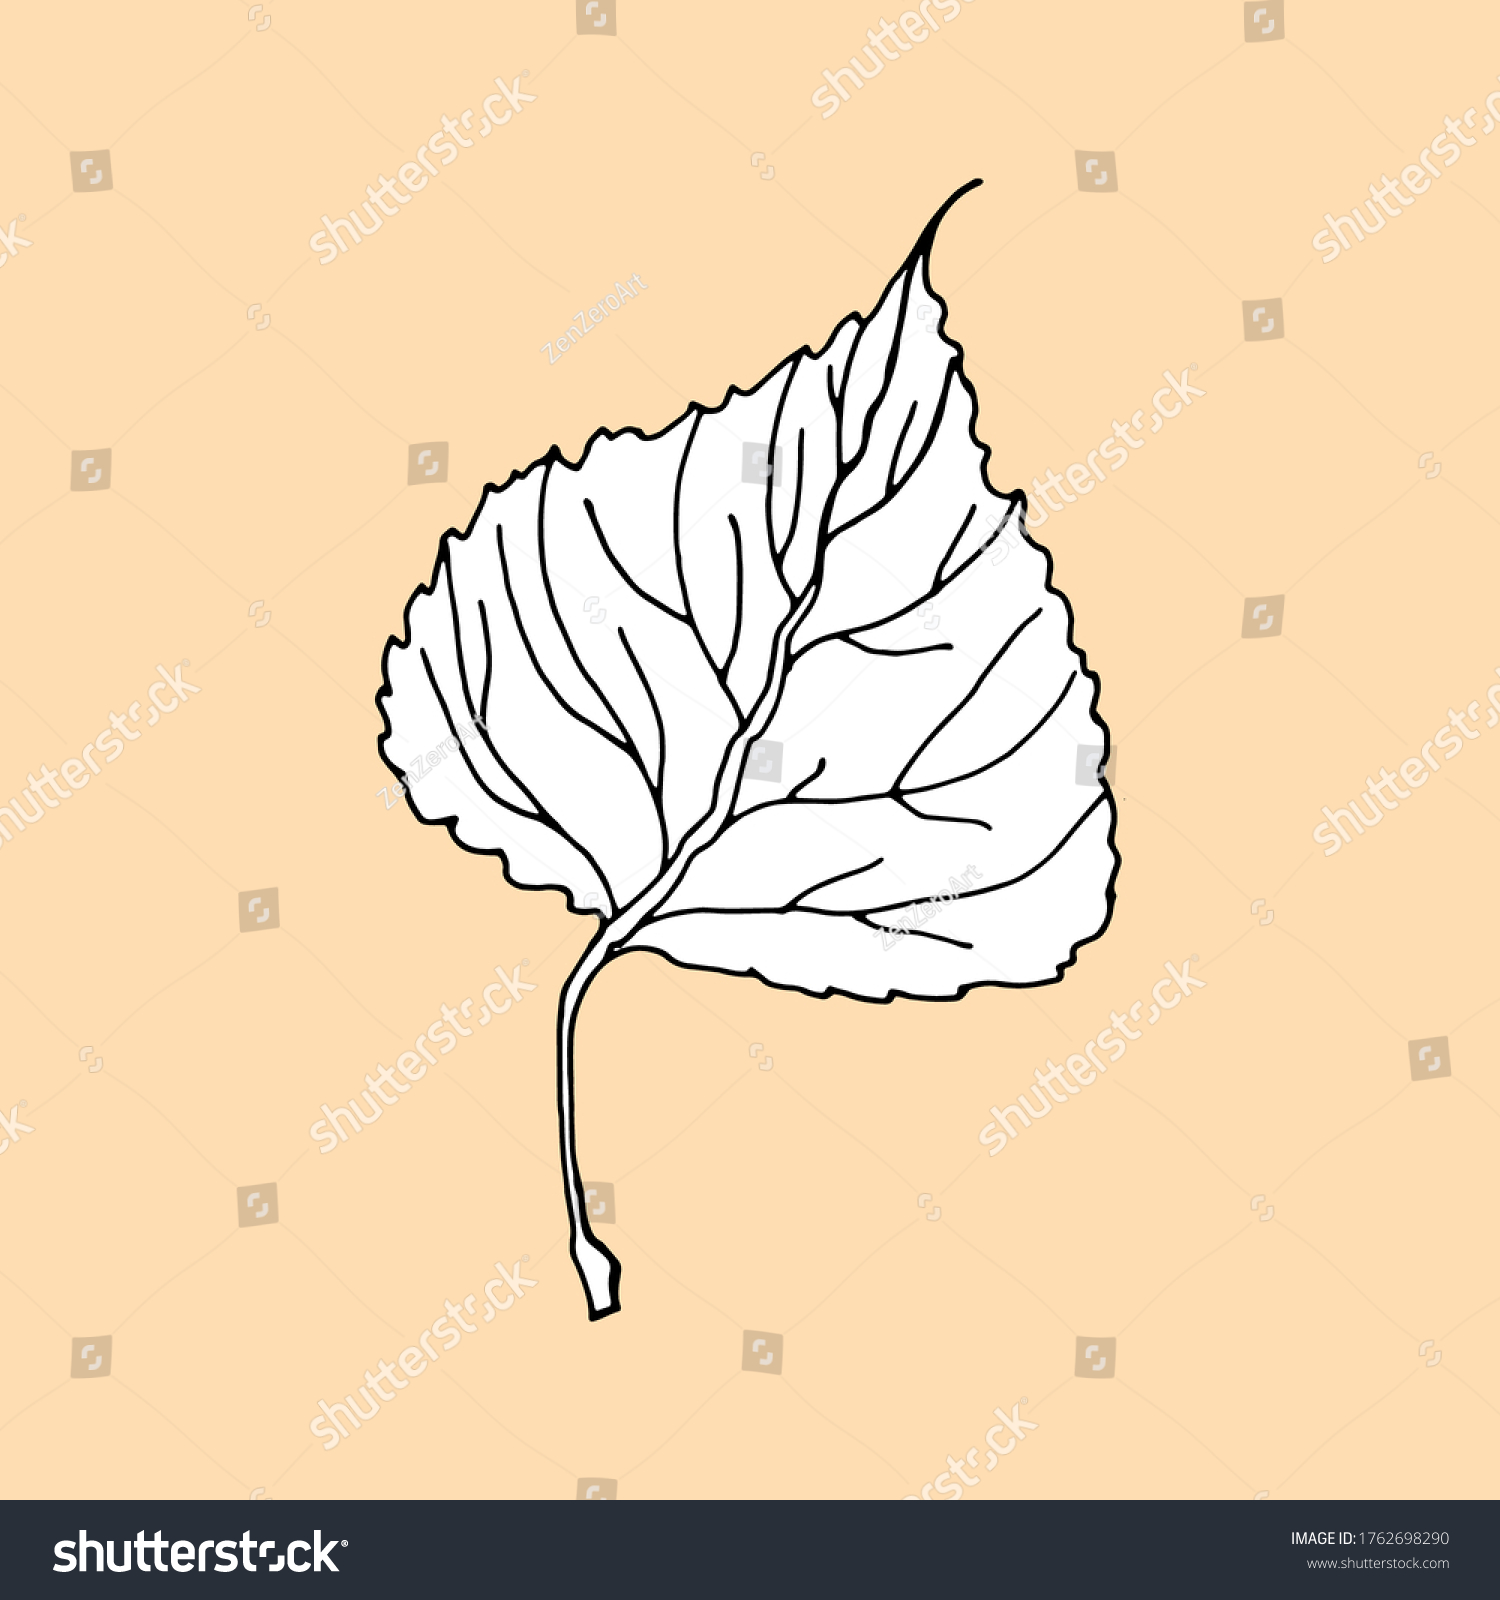 Stock Vector Aspen Leaf Silhouette Icon White Fill Color Ink Sketch Hand Drawn Illustration Flat Doodle Style 1762698290 